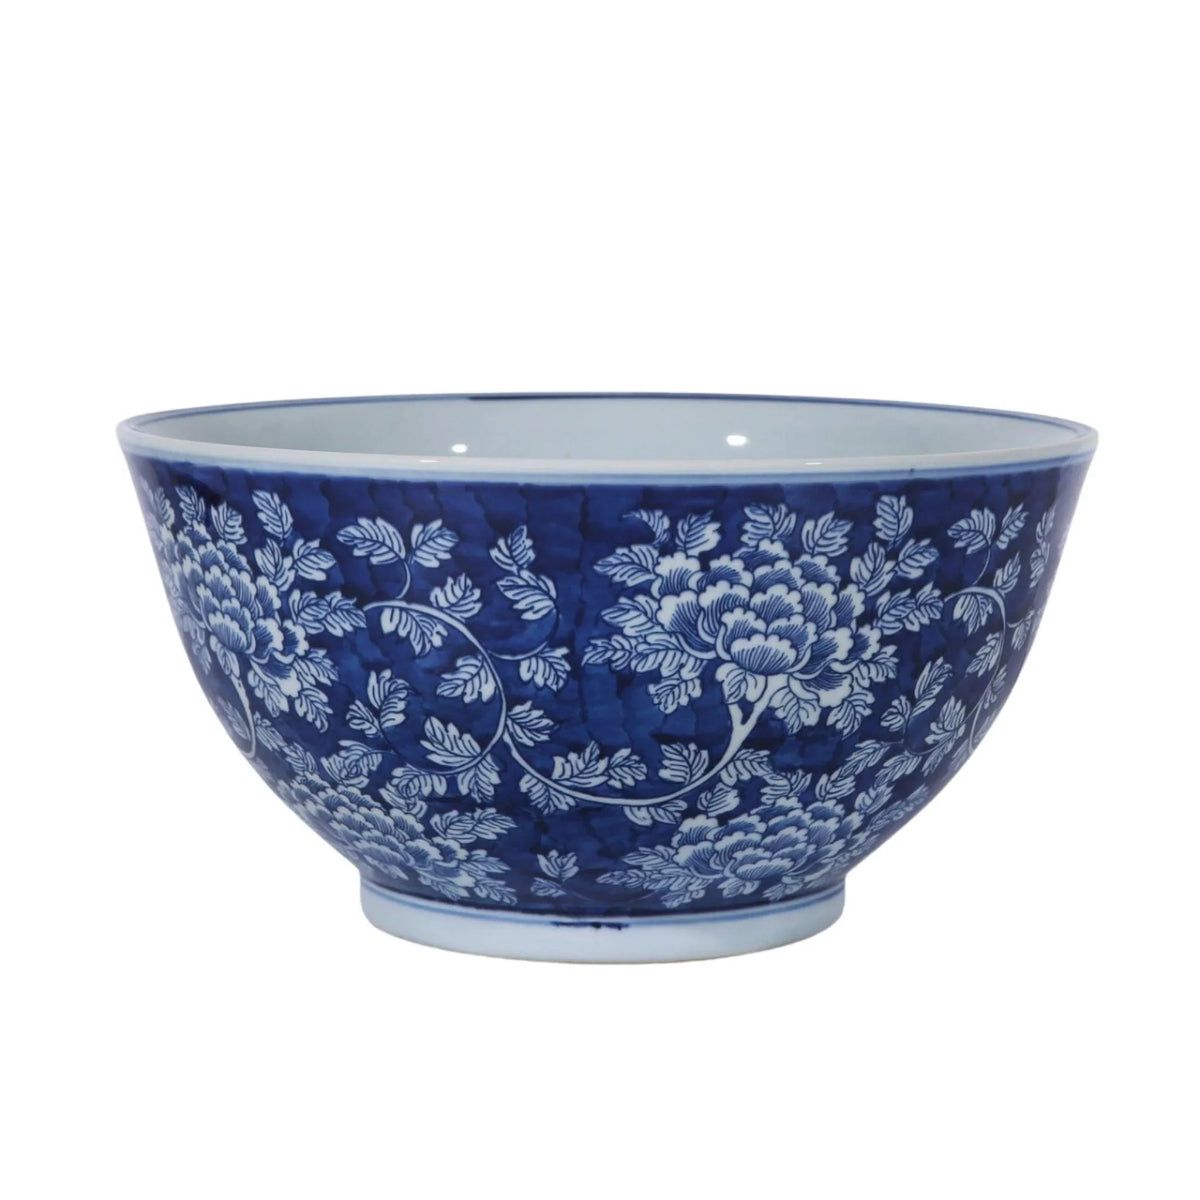 Blue and White Peony Floral Porcelain Bowl | The Well Appointed House, LLC